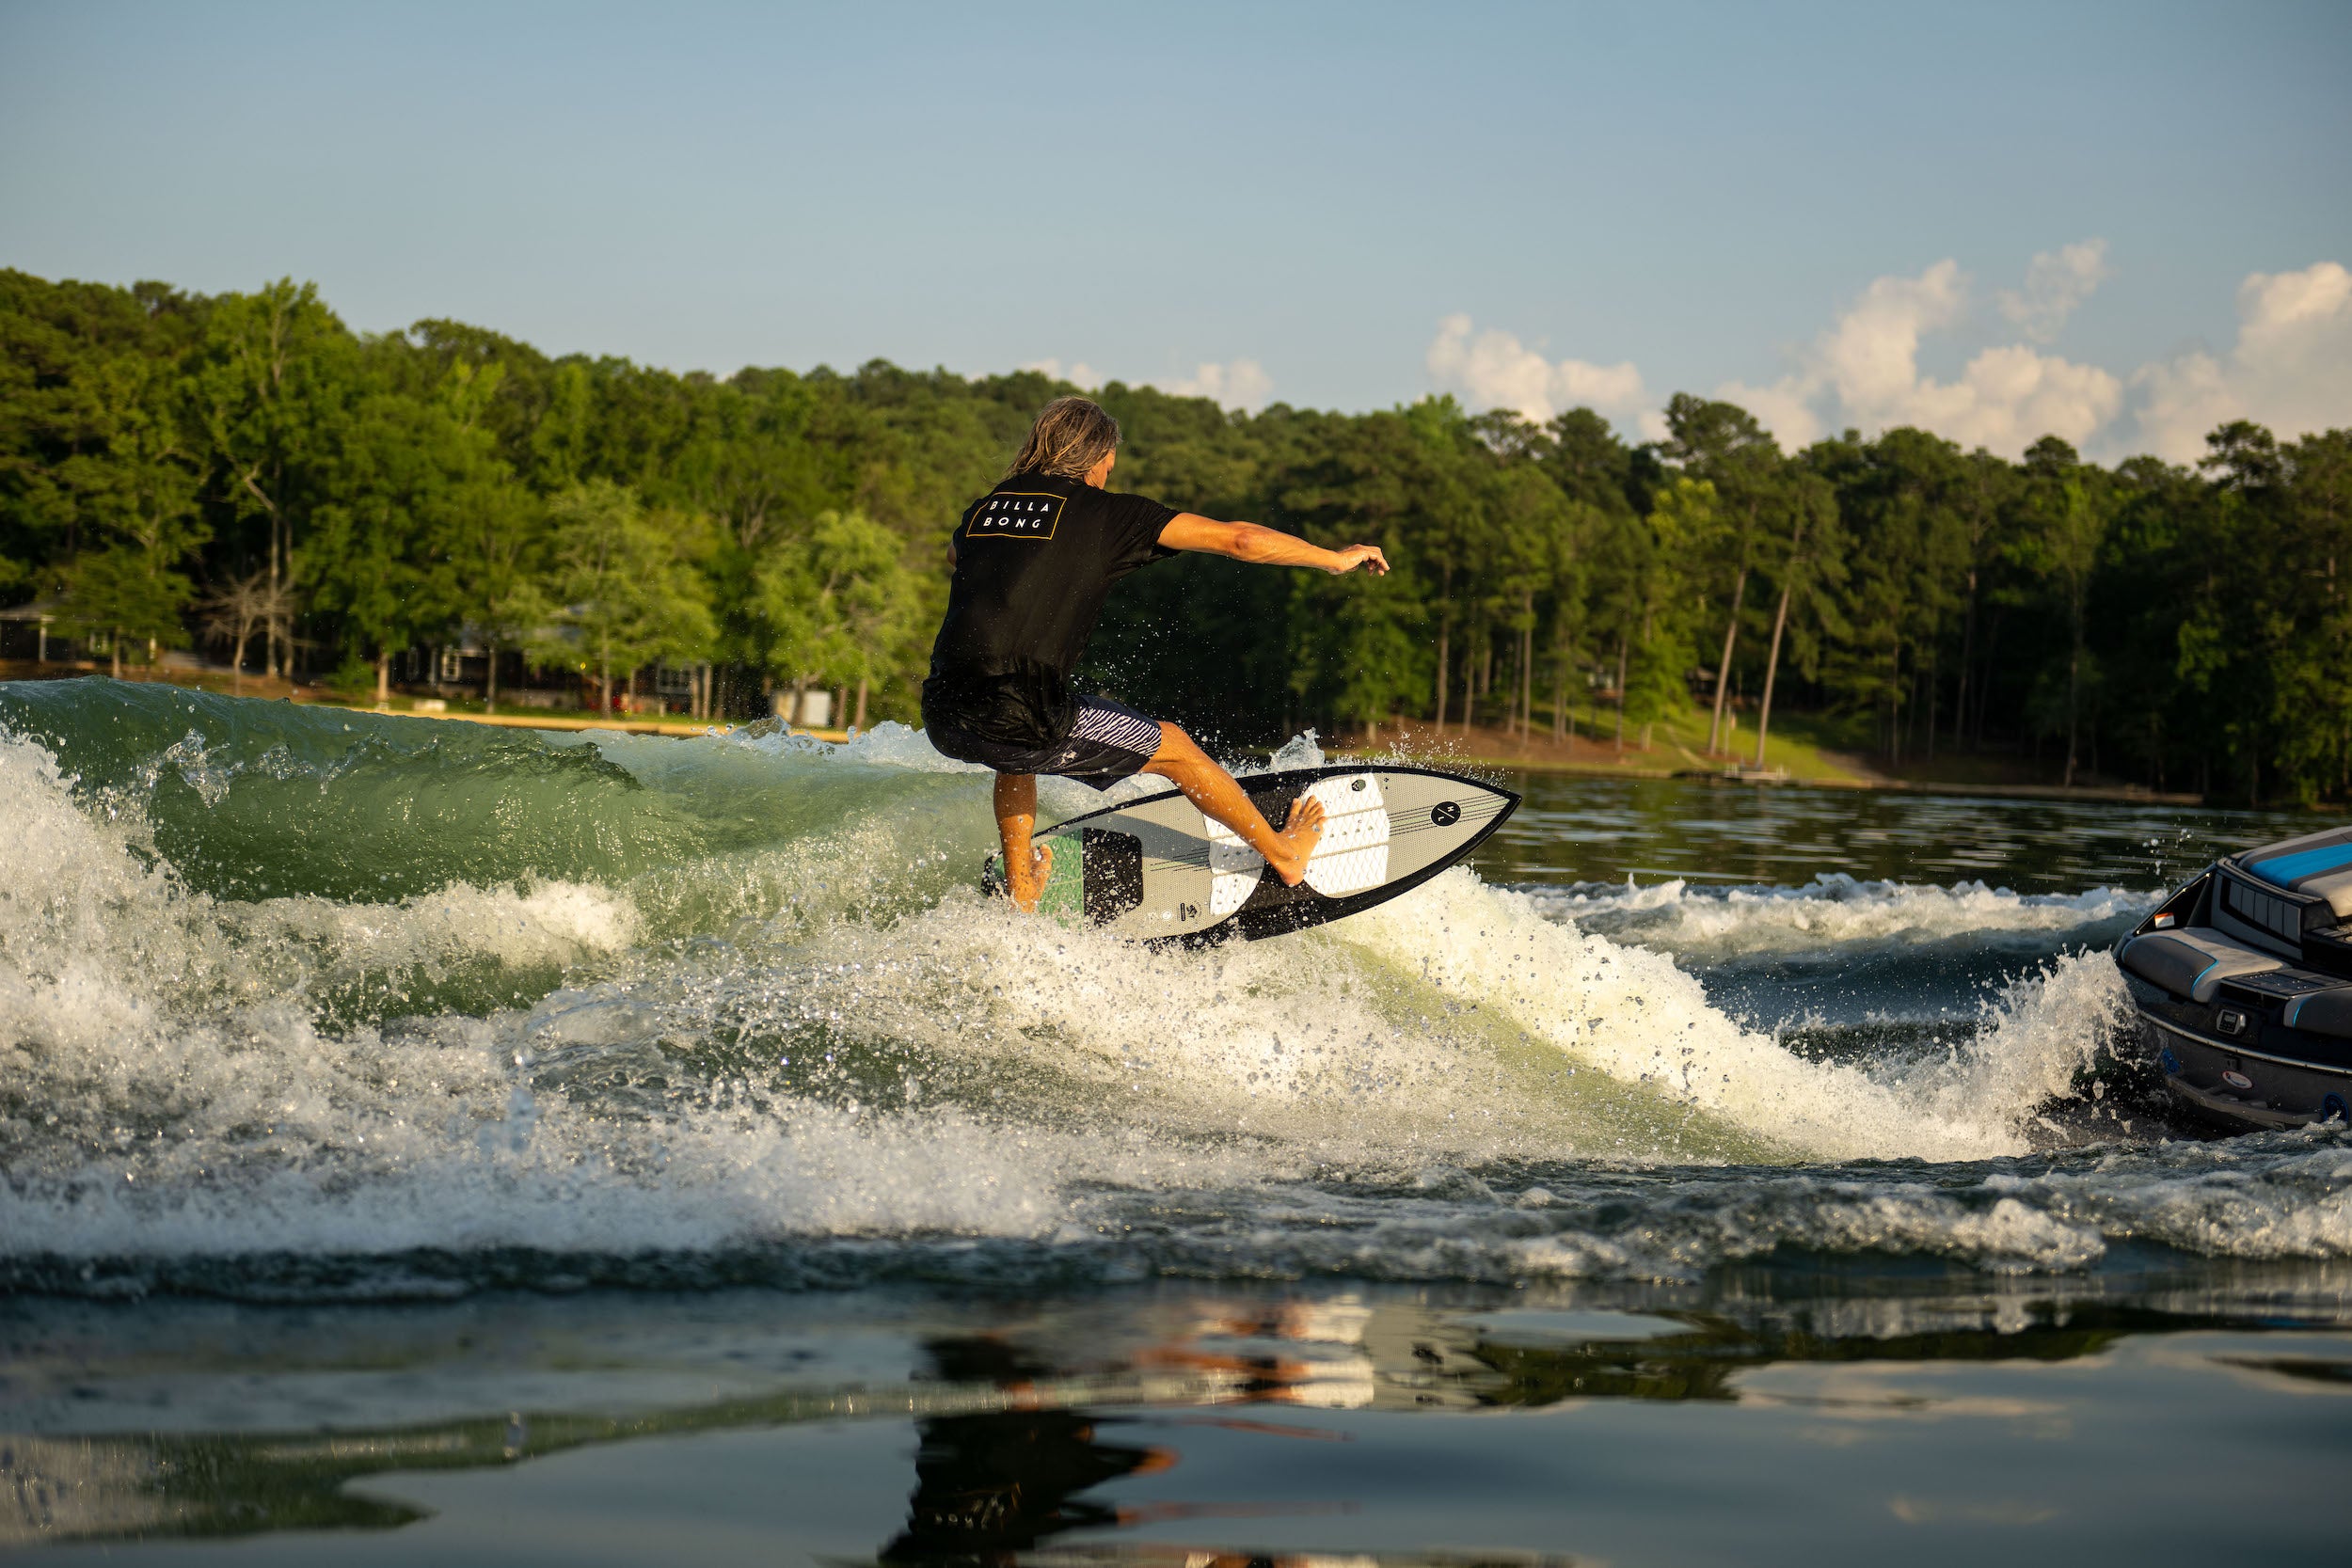 An Hyperlite 2023 Automatic Wakesurf Board rider riding a wave in Florida.